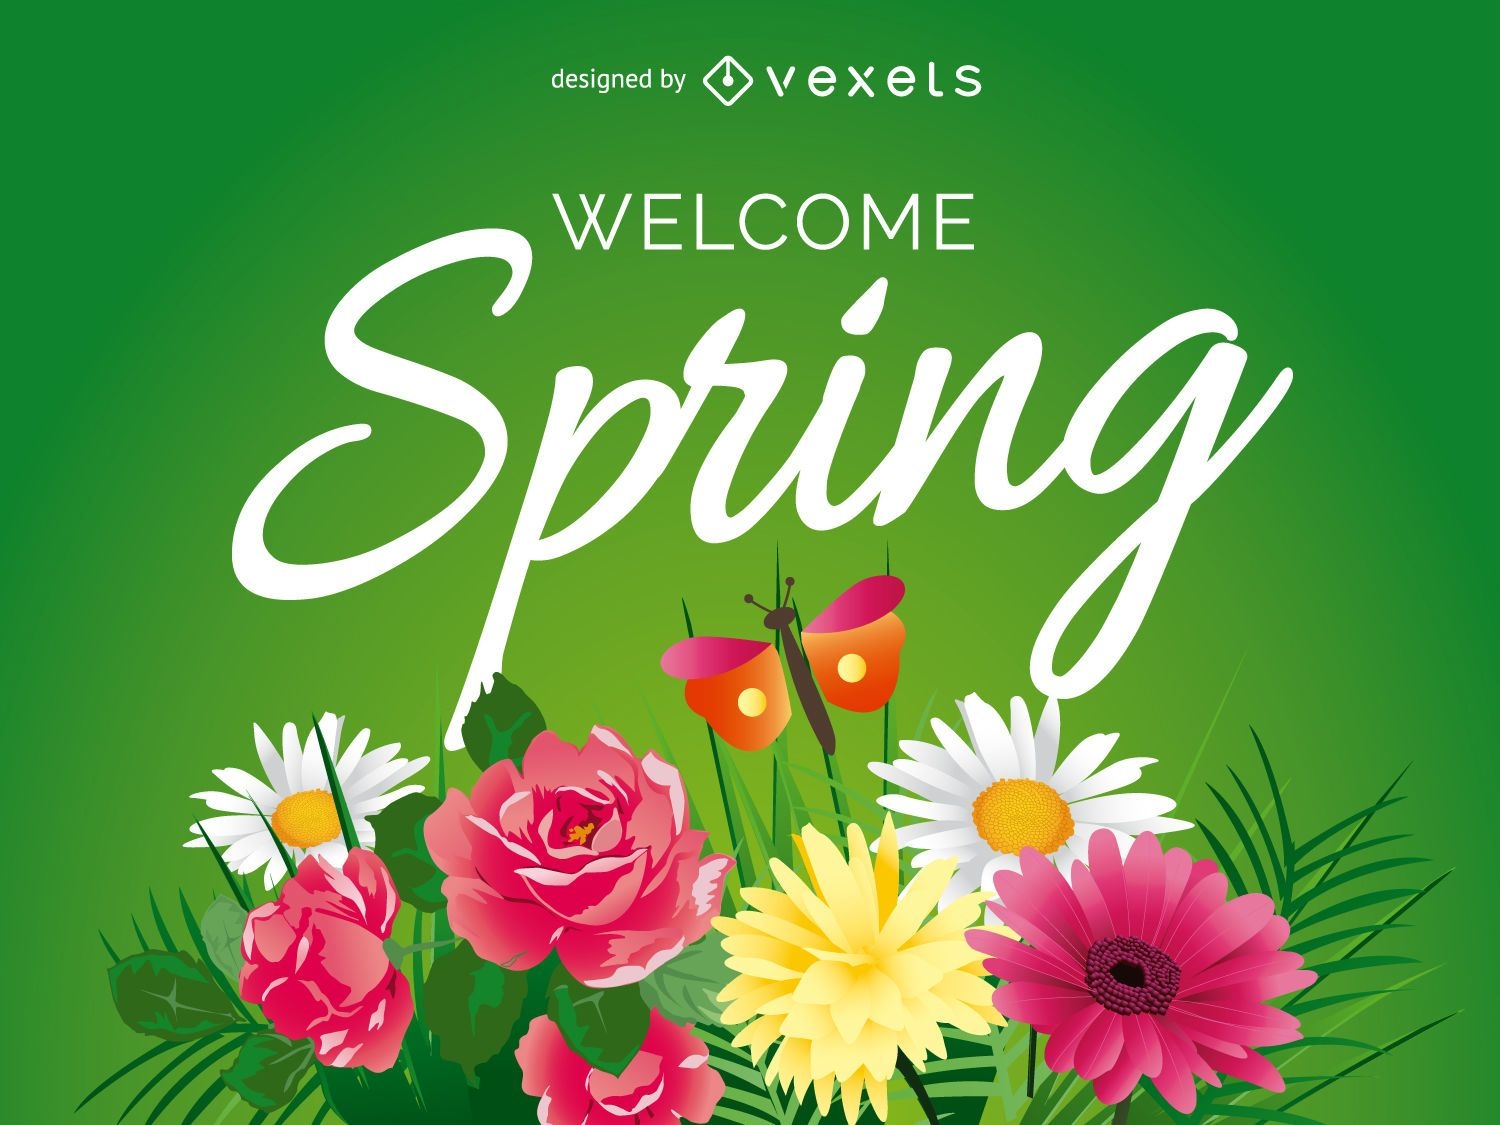 Welcome spring sign with flowers